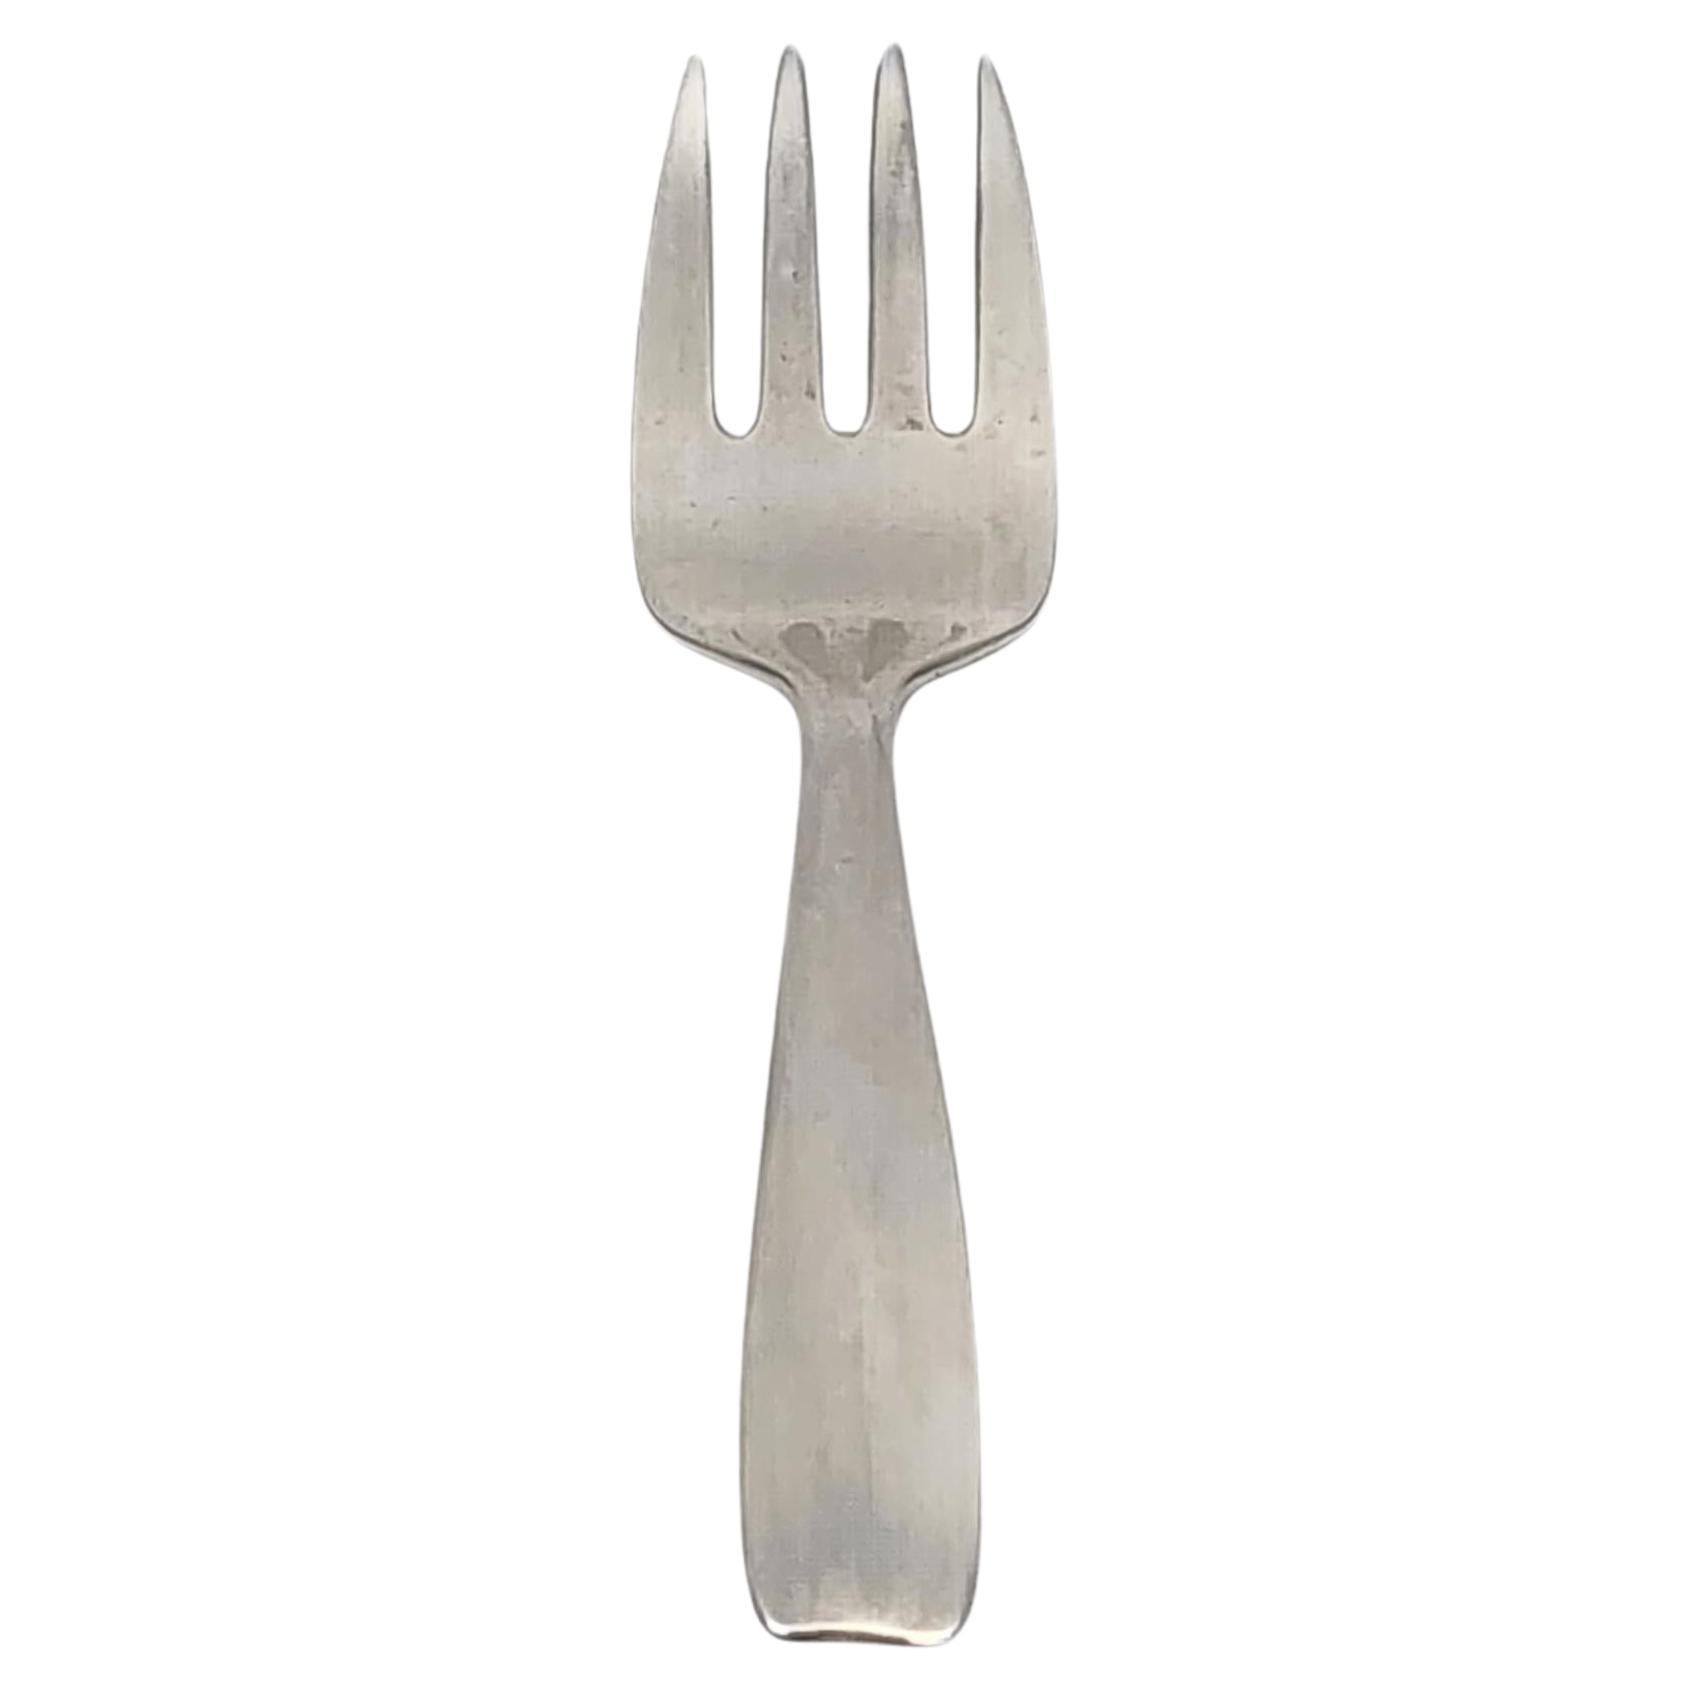 Tiffany & Co Cordis Sterling Silver Baby/Child Feeding Fork #15491 For Sale